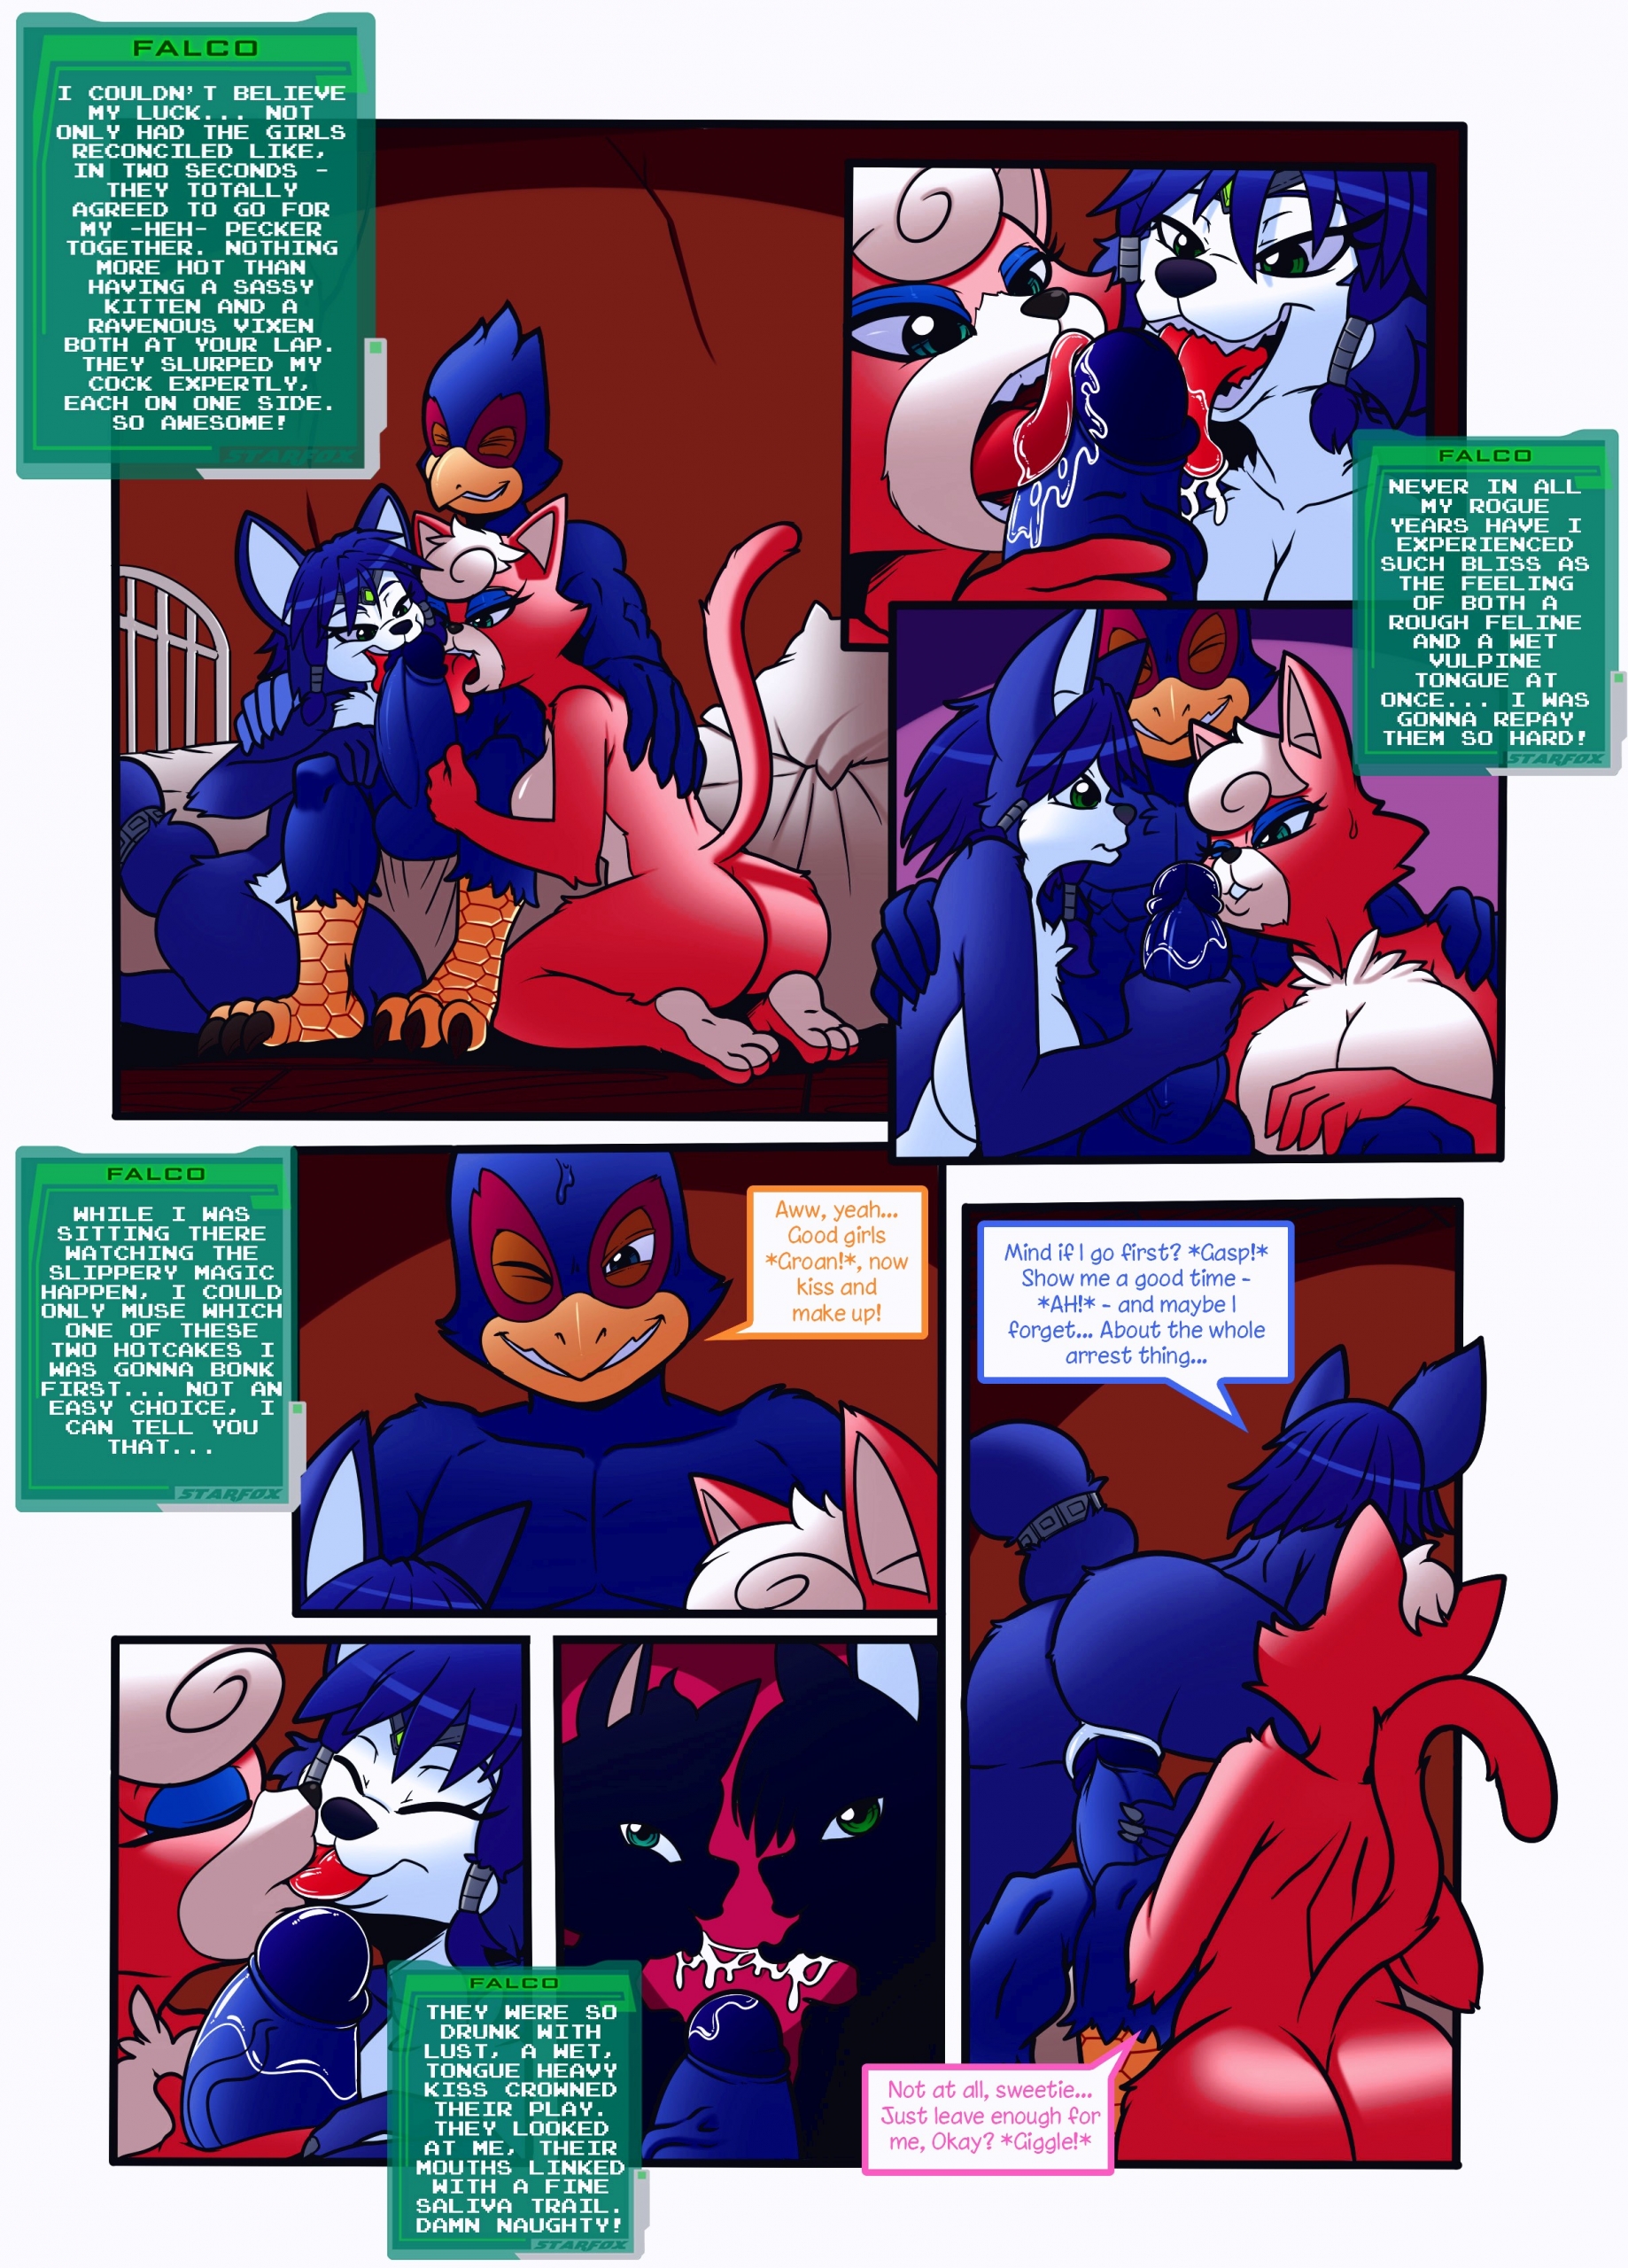 Assault and Flattery porn comic page 006